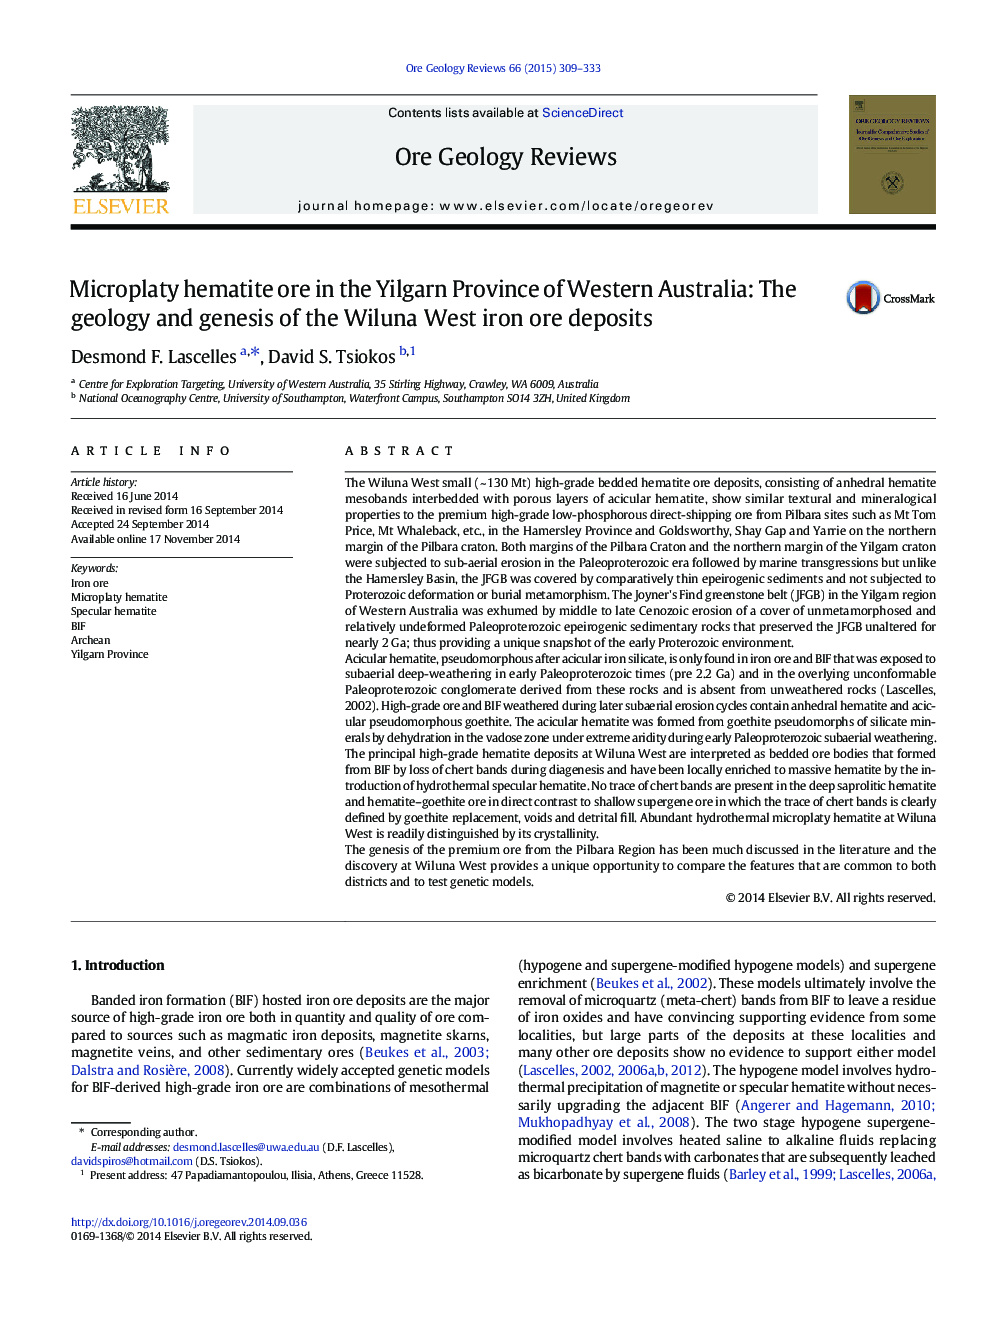 Microplaty hematite ore in the Yilgarn Province of Western Australia: The geology and genesis of the Wiluna West iron ore deposits